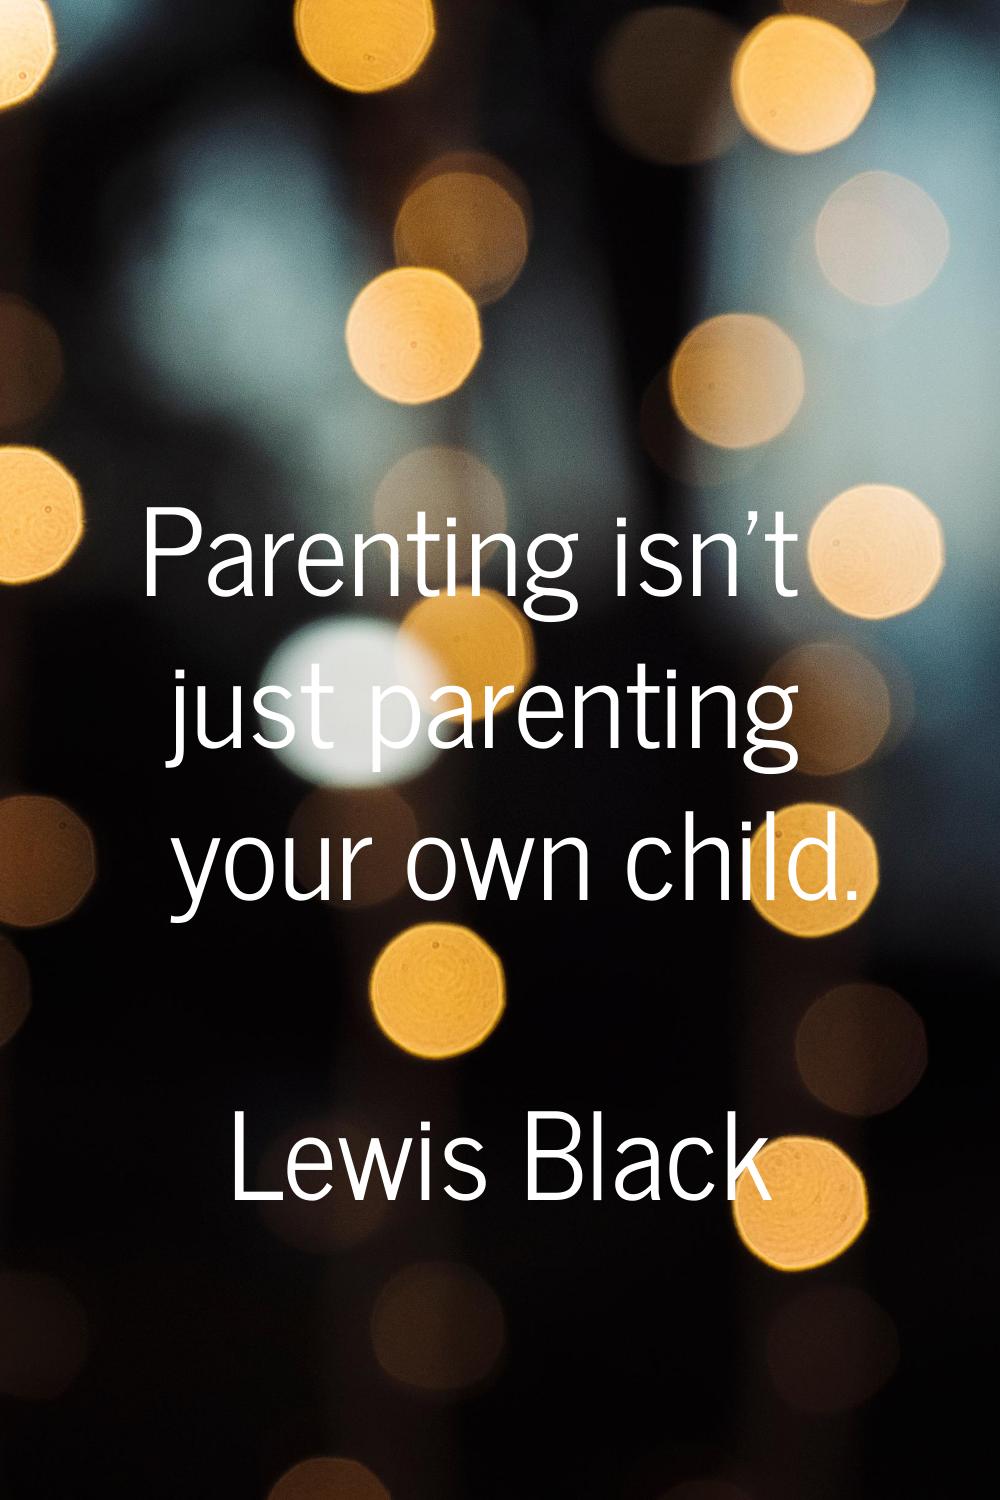 Parenting isn't just parenting your own child.